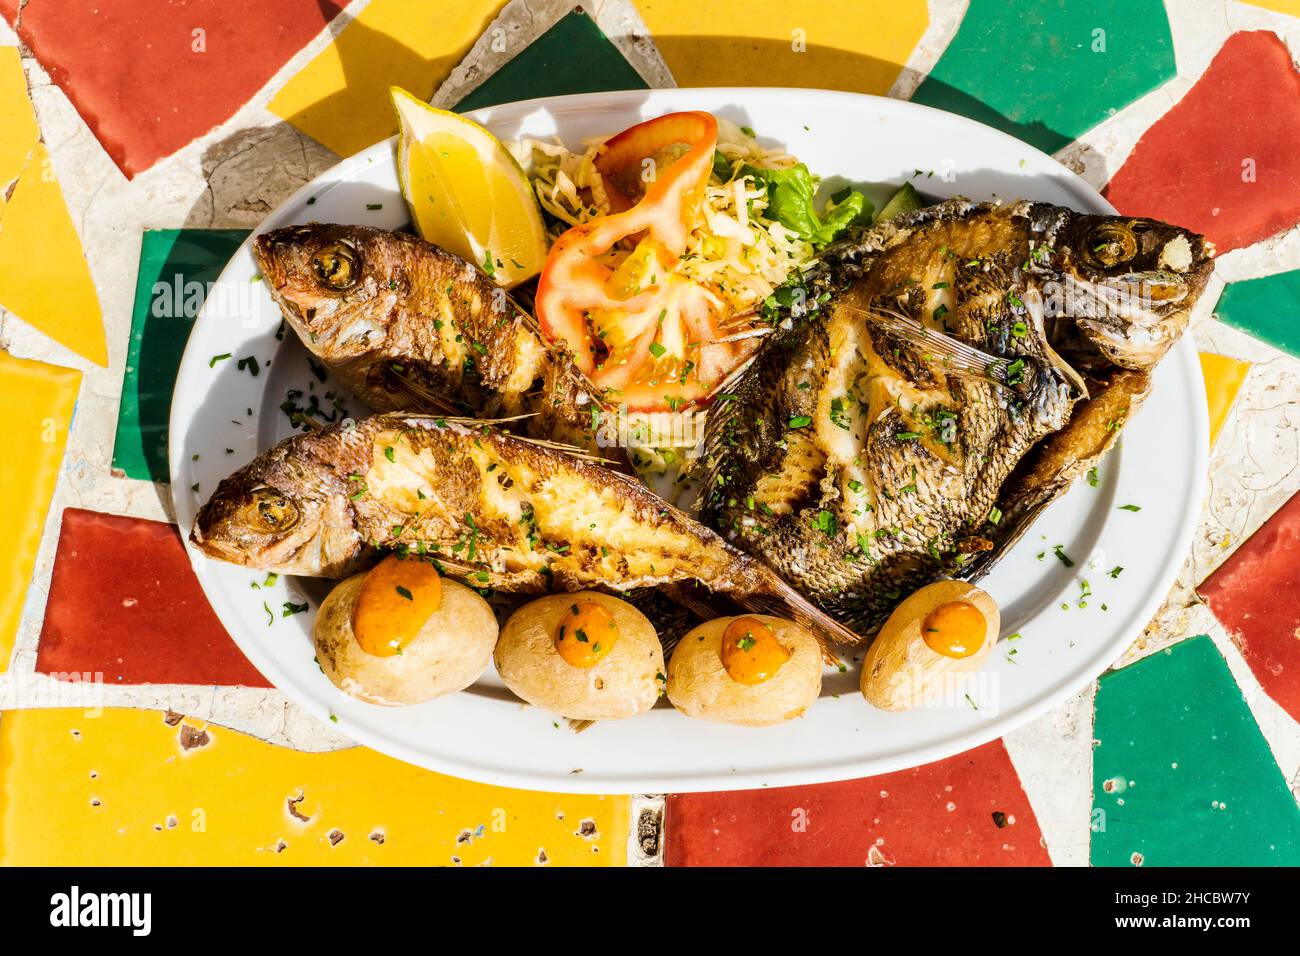 Deep fried fish with salad and traditional potatoes with red sauce in Gran Canaria, Canary Islands, Spain Stock Photo